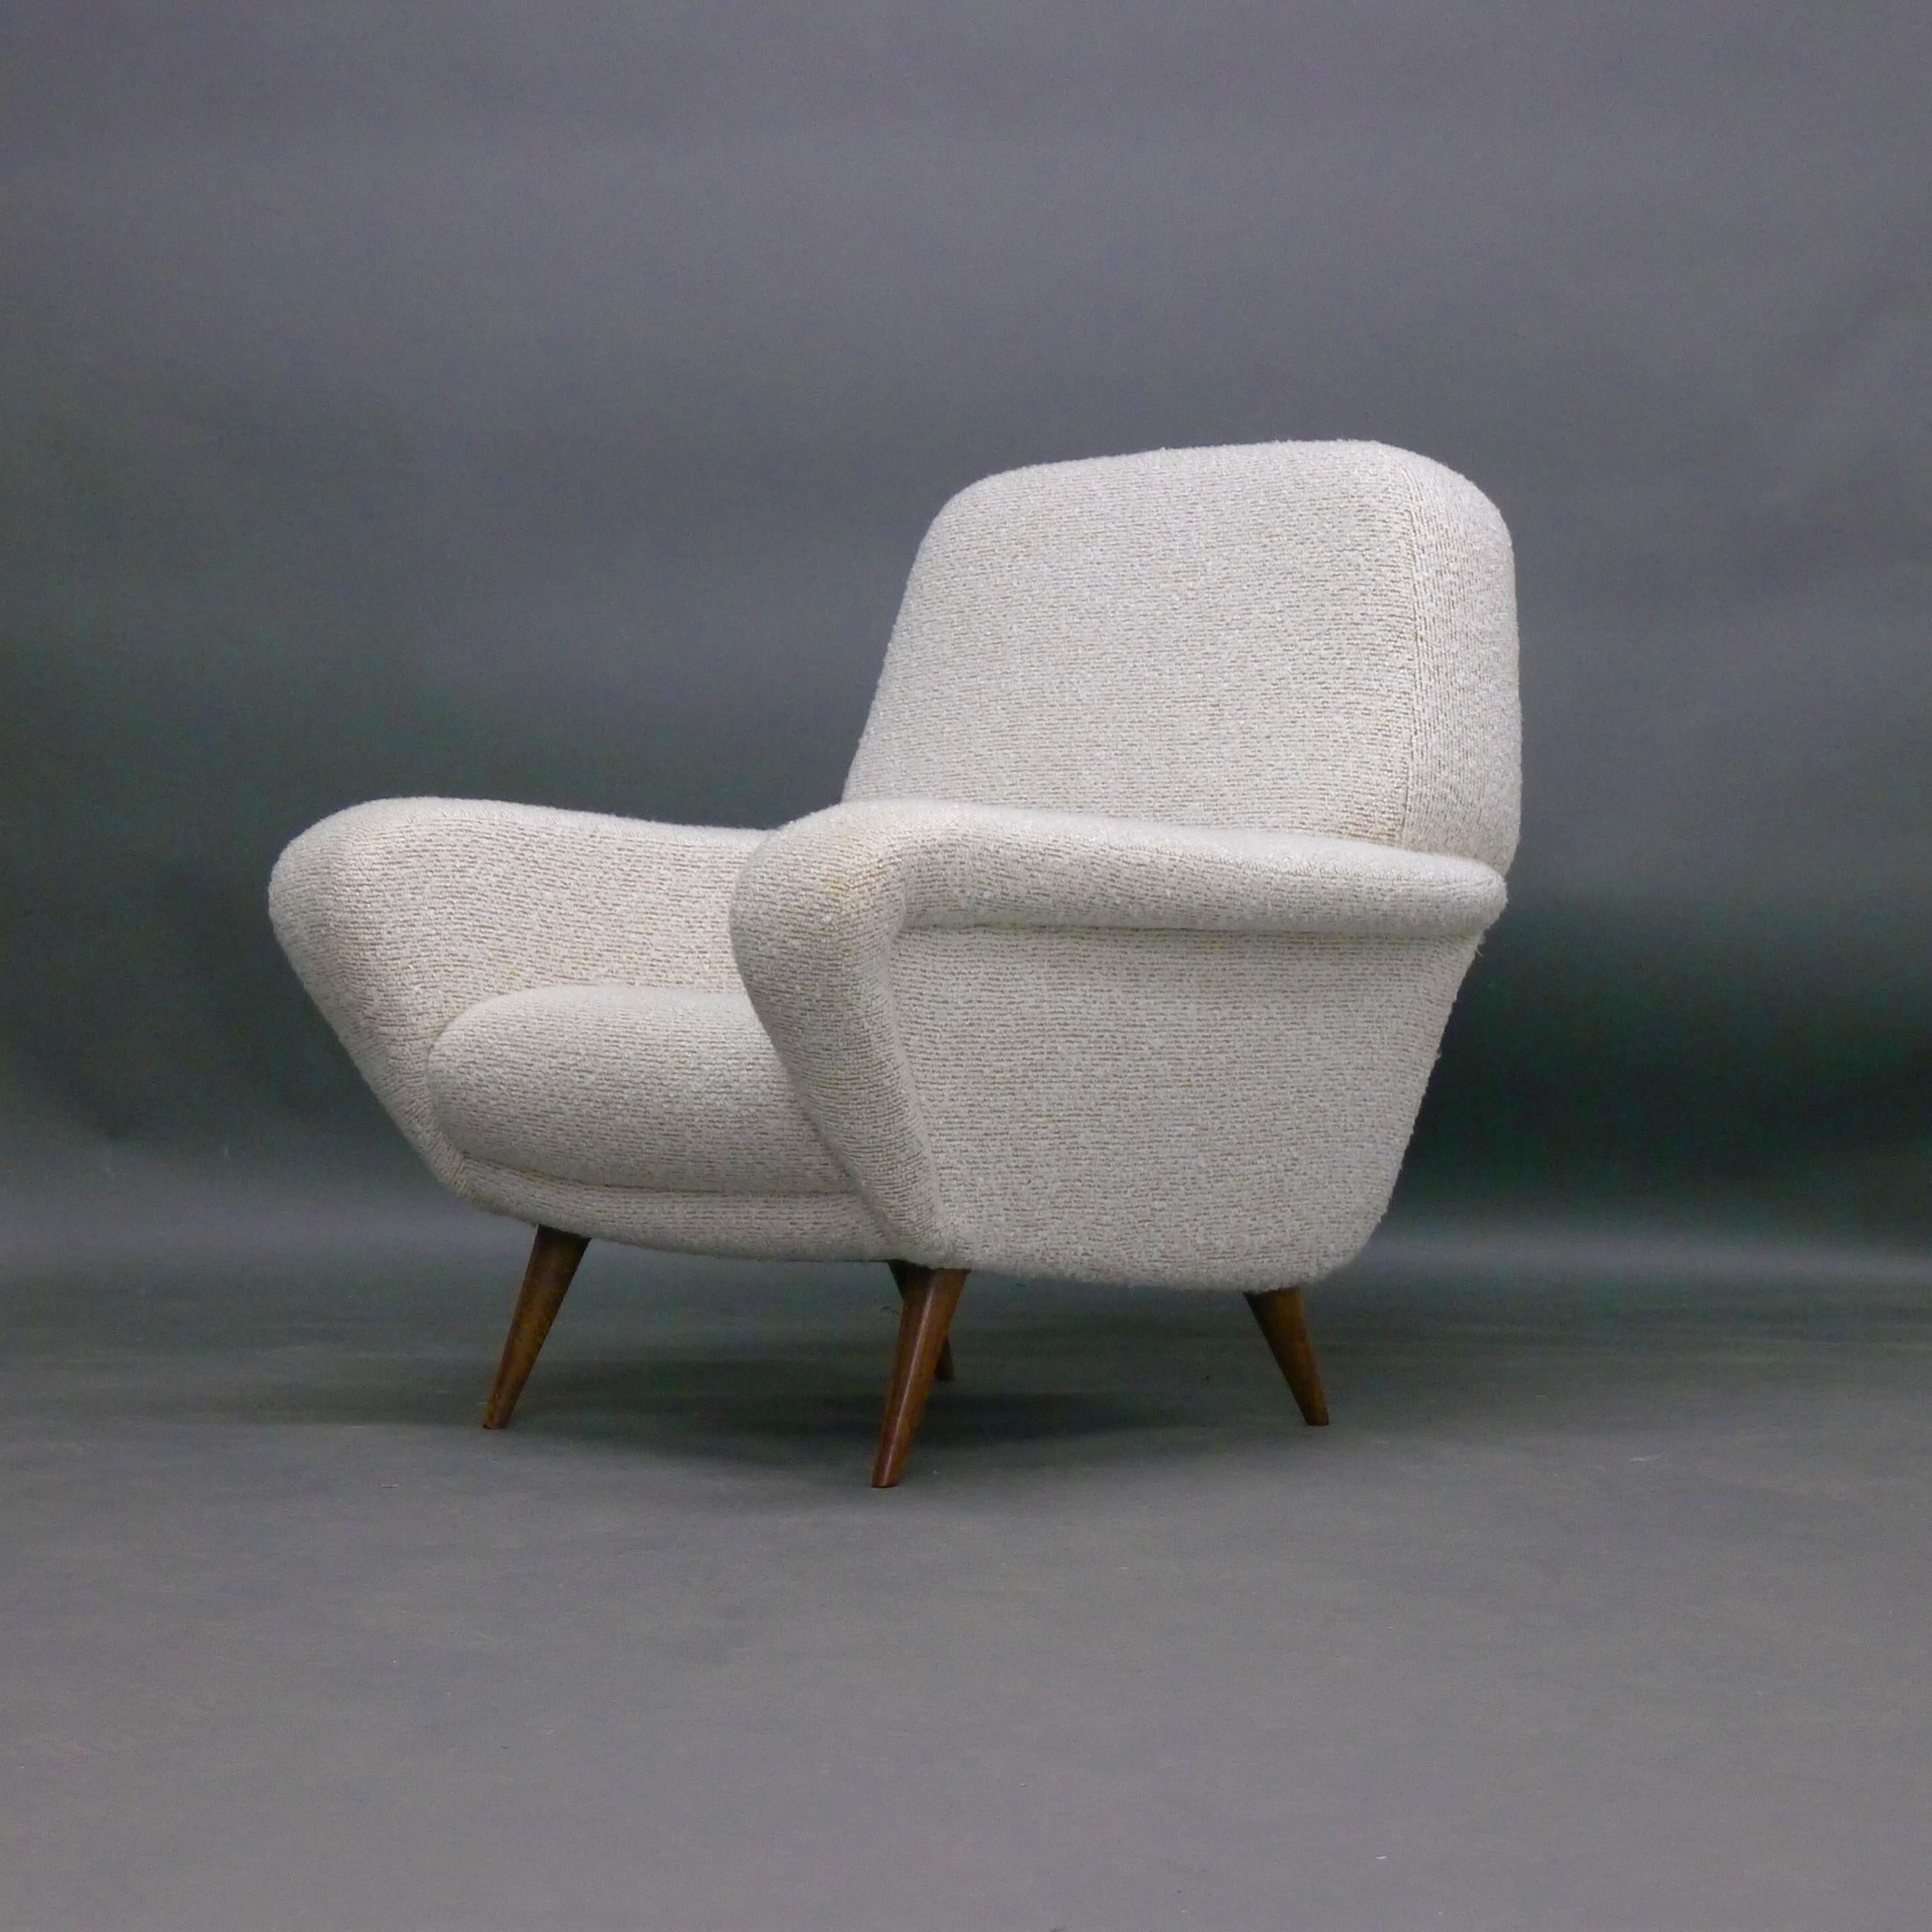 Upholstery Gianfranco Frattini, Pair of Upholstered Armchairs, model 830, by Cassina, 1950s For Sale